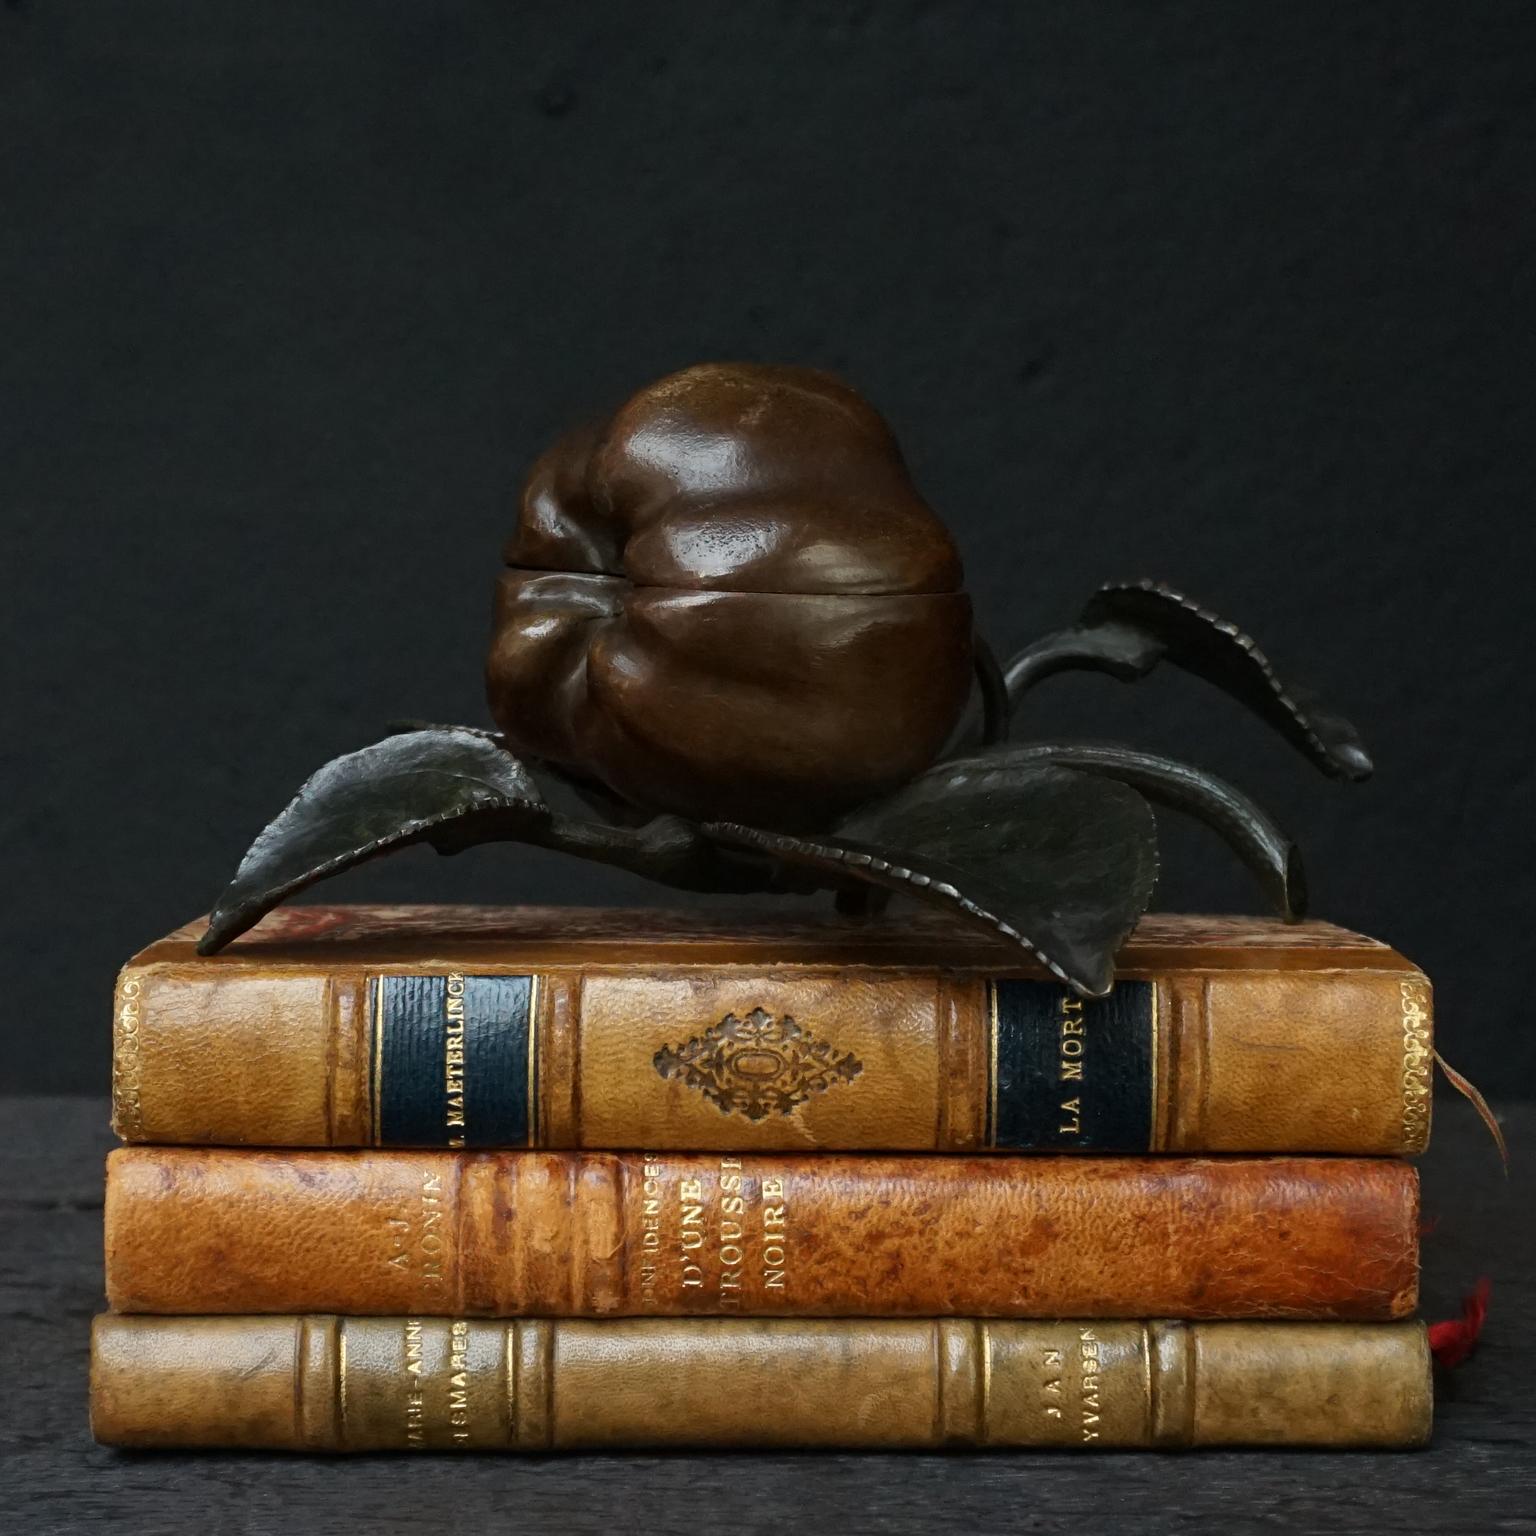 Antique hinged bronze two toned paint patinated apple on a twig with leaves, to keep or collect your little trinkets in.
The paint patina creates a deep golden apple colour on the shiny apple cheeks and the elegant thin detailed leaves have a